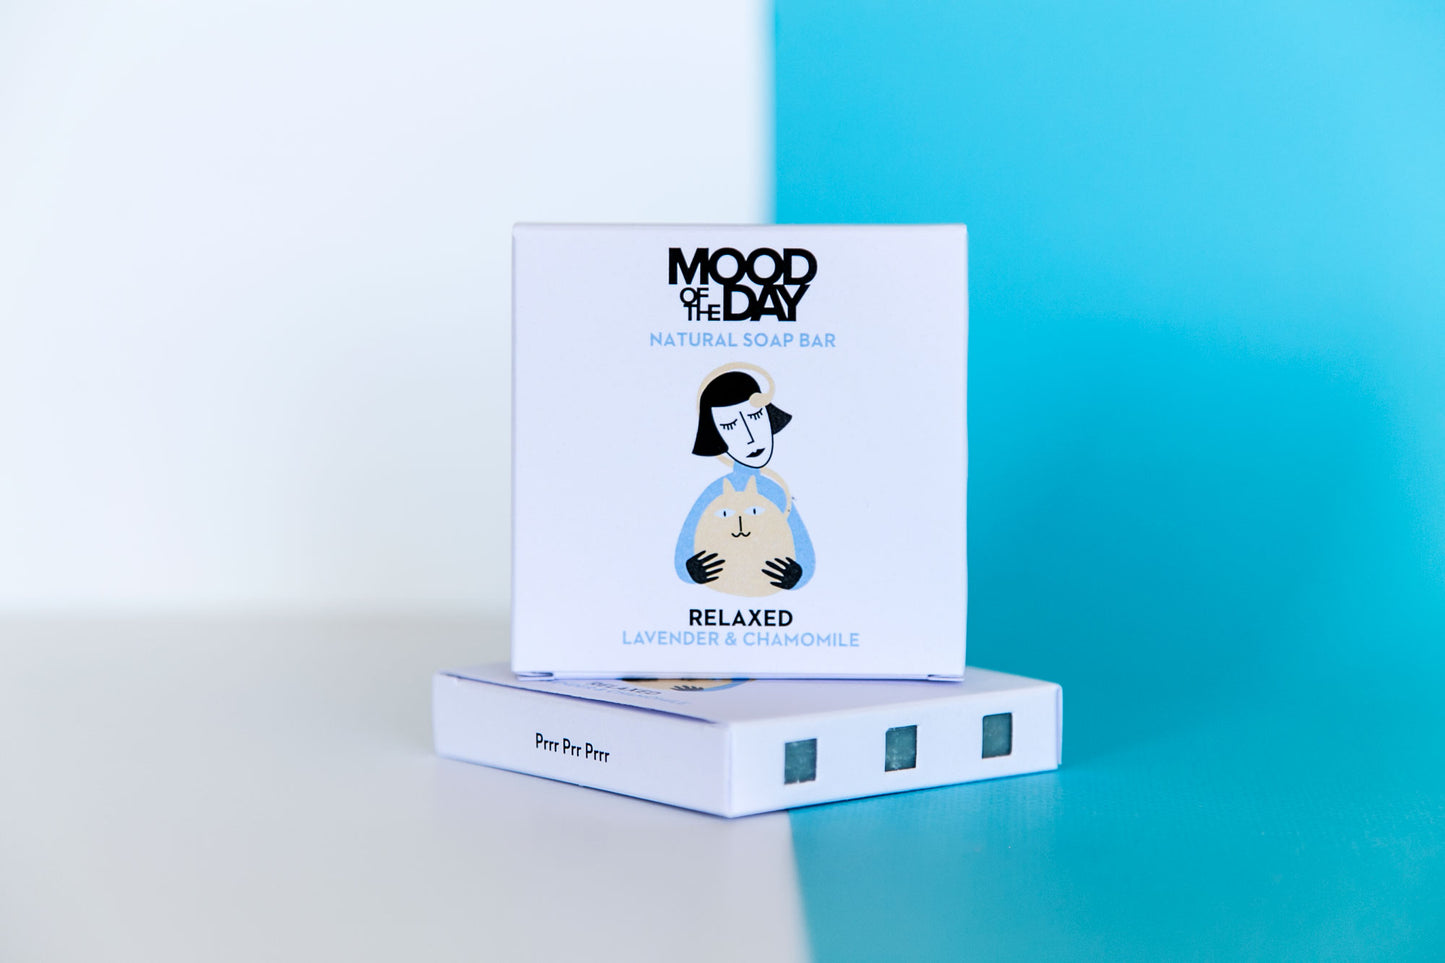 Mood of the Day Soap Bar 60g